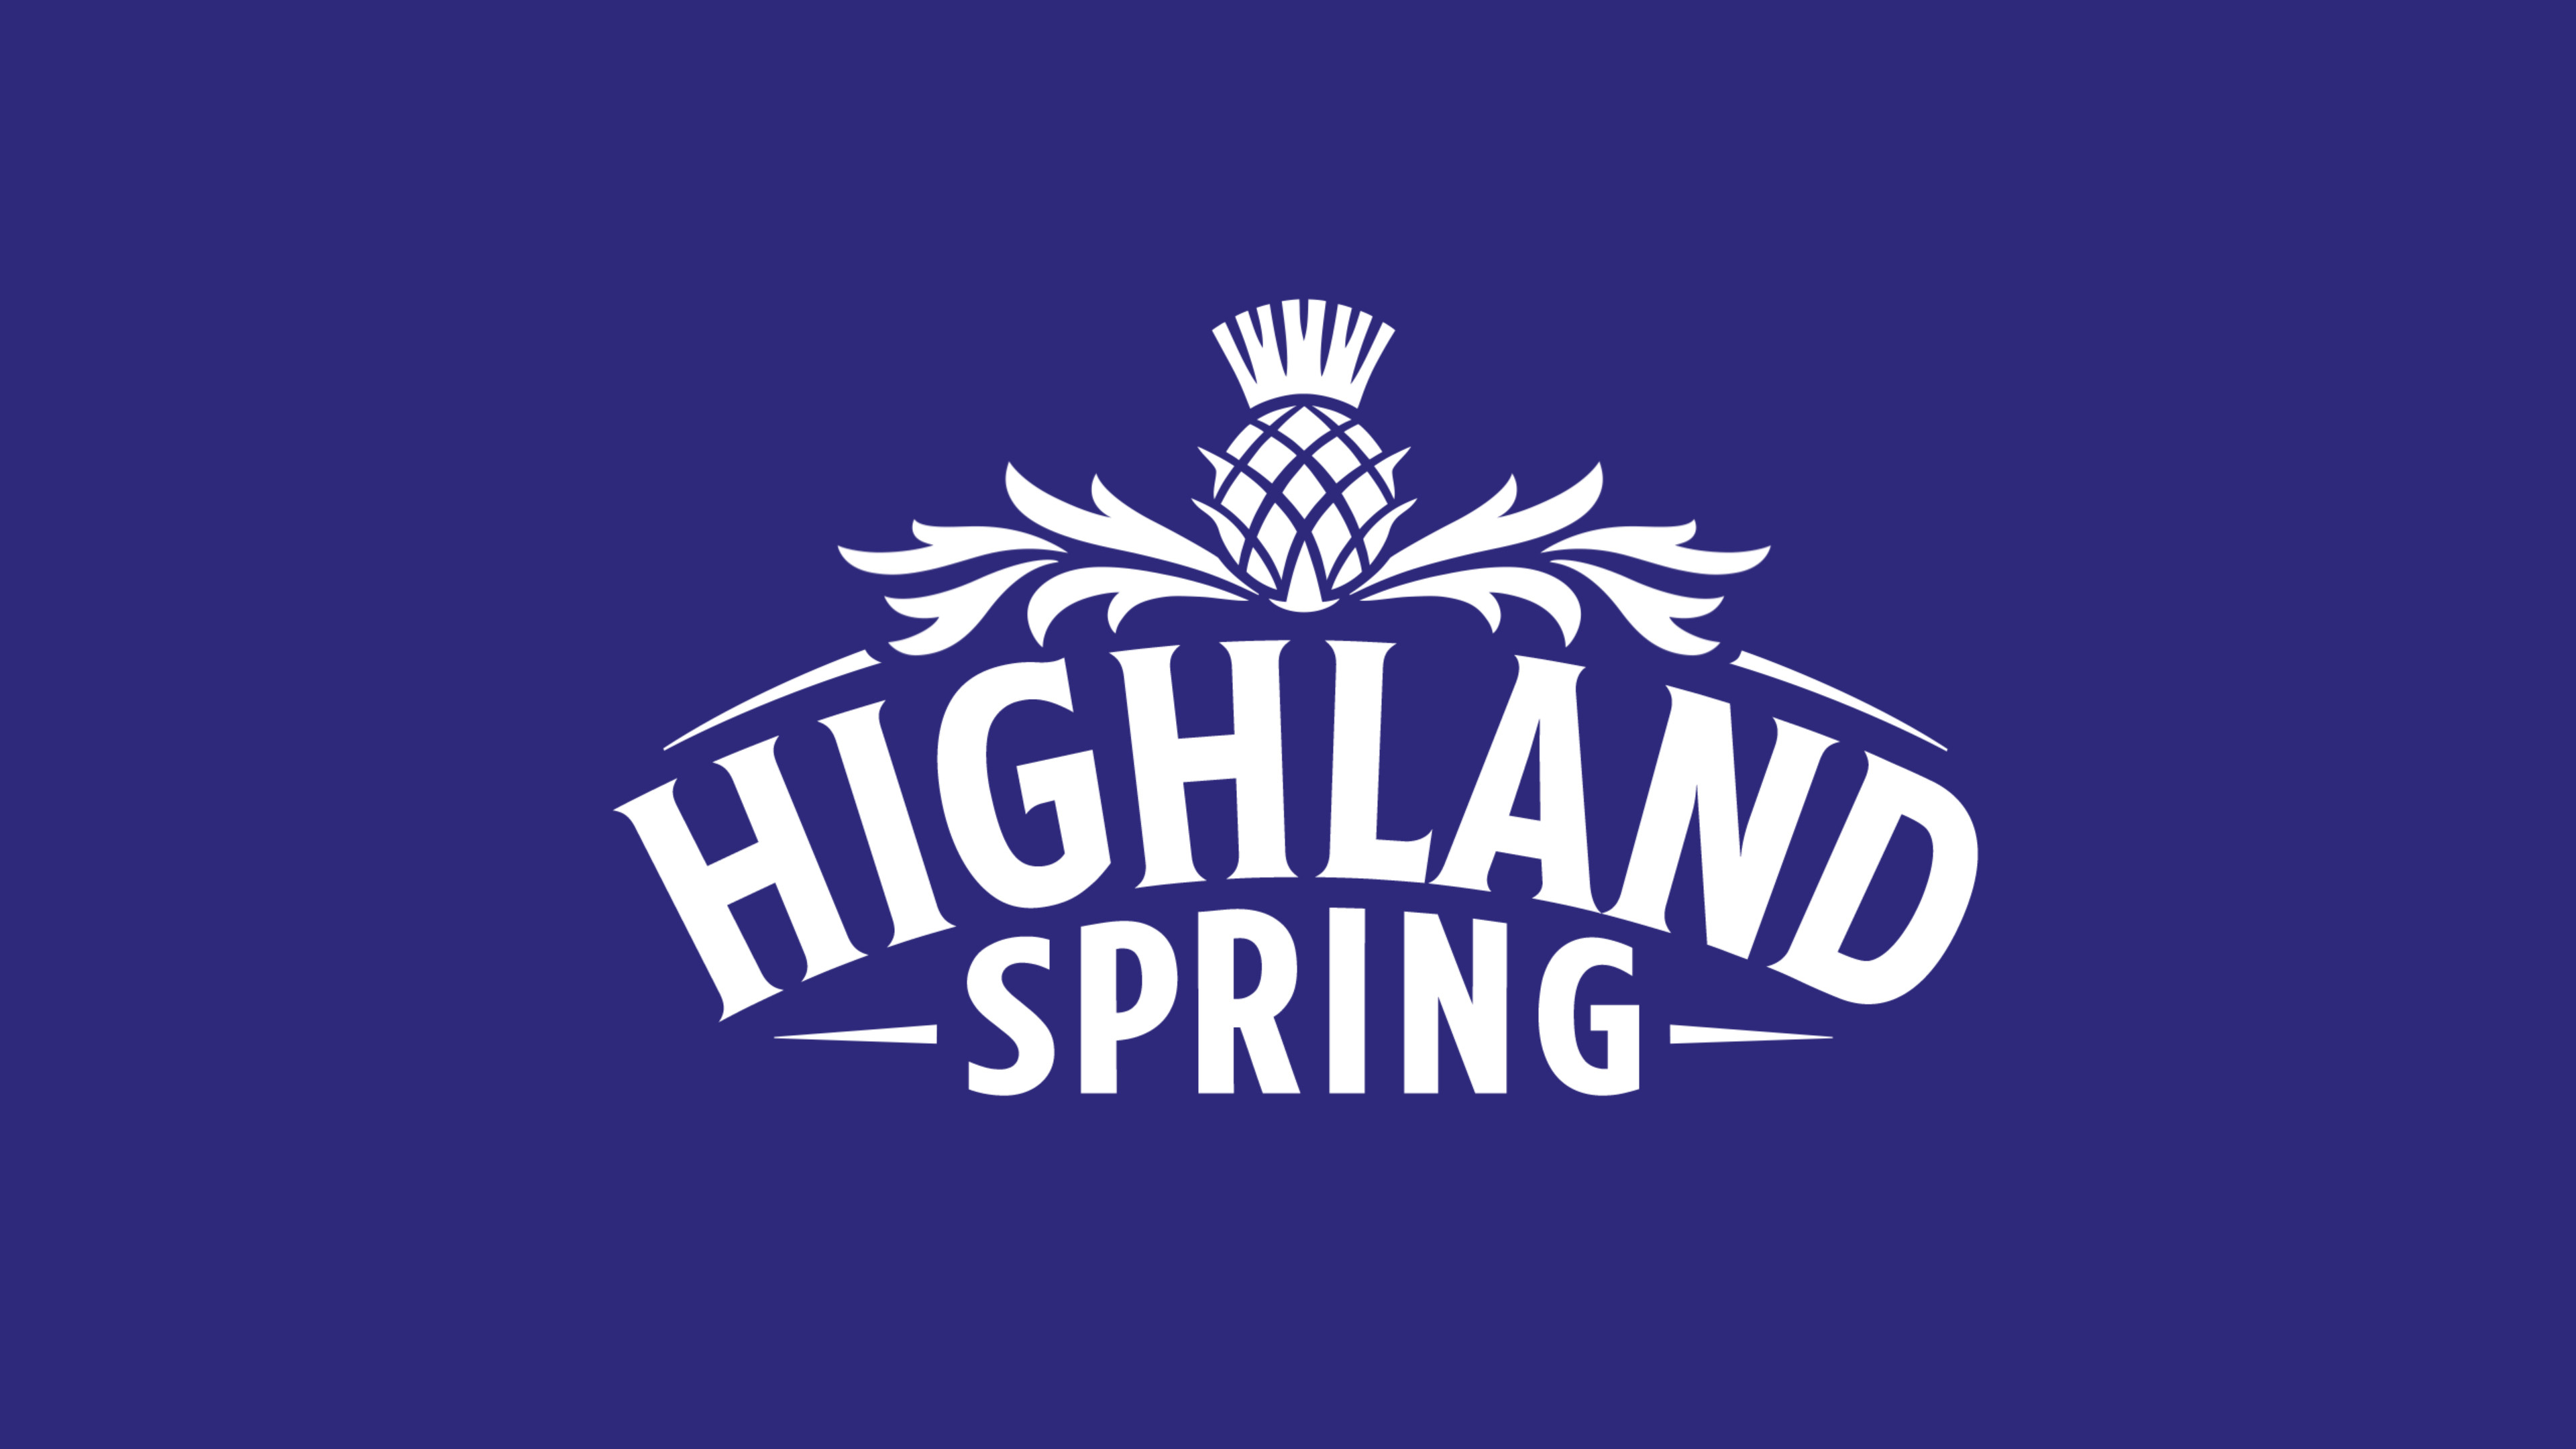 44 Facts about Highland 